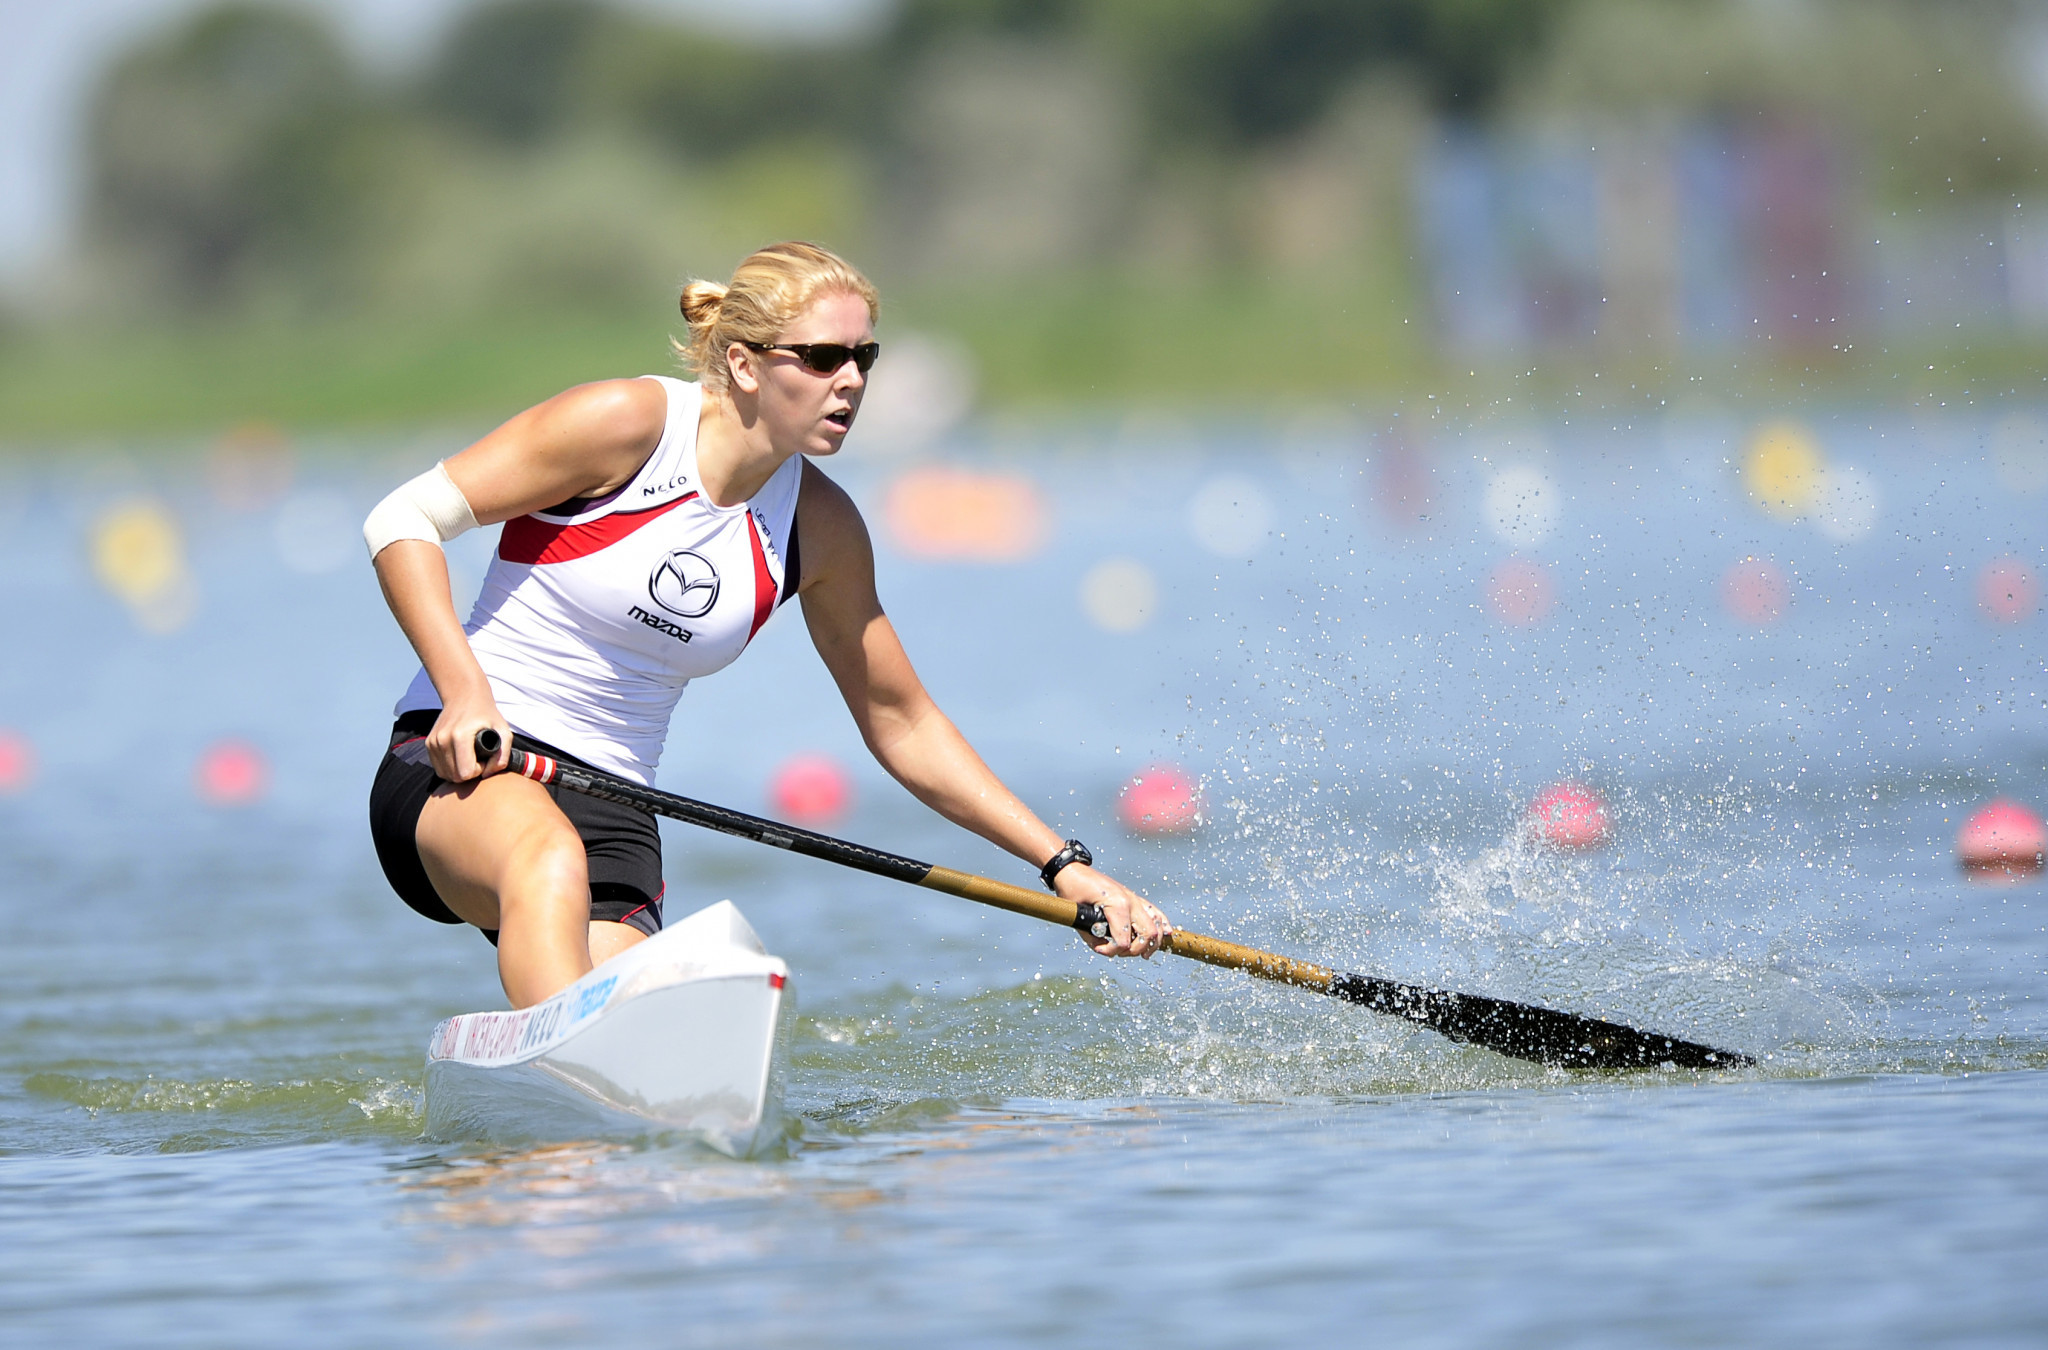 Vincent-Lapointe to lead home Canadian charge at Pan American Canoe Sprint Championships